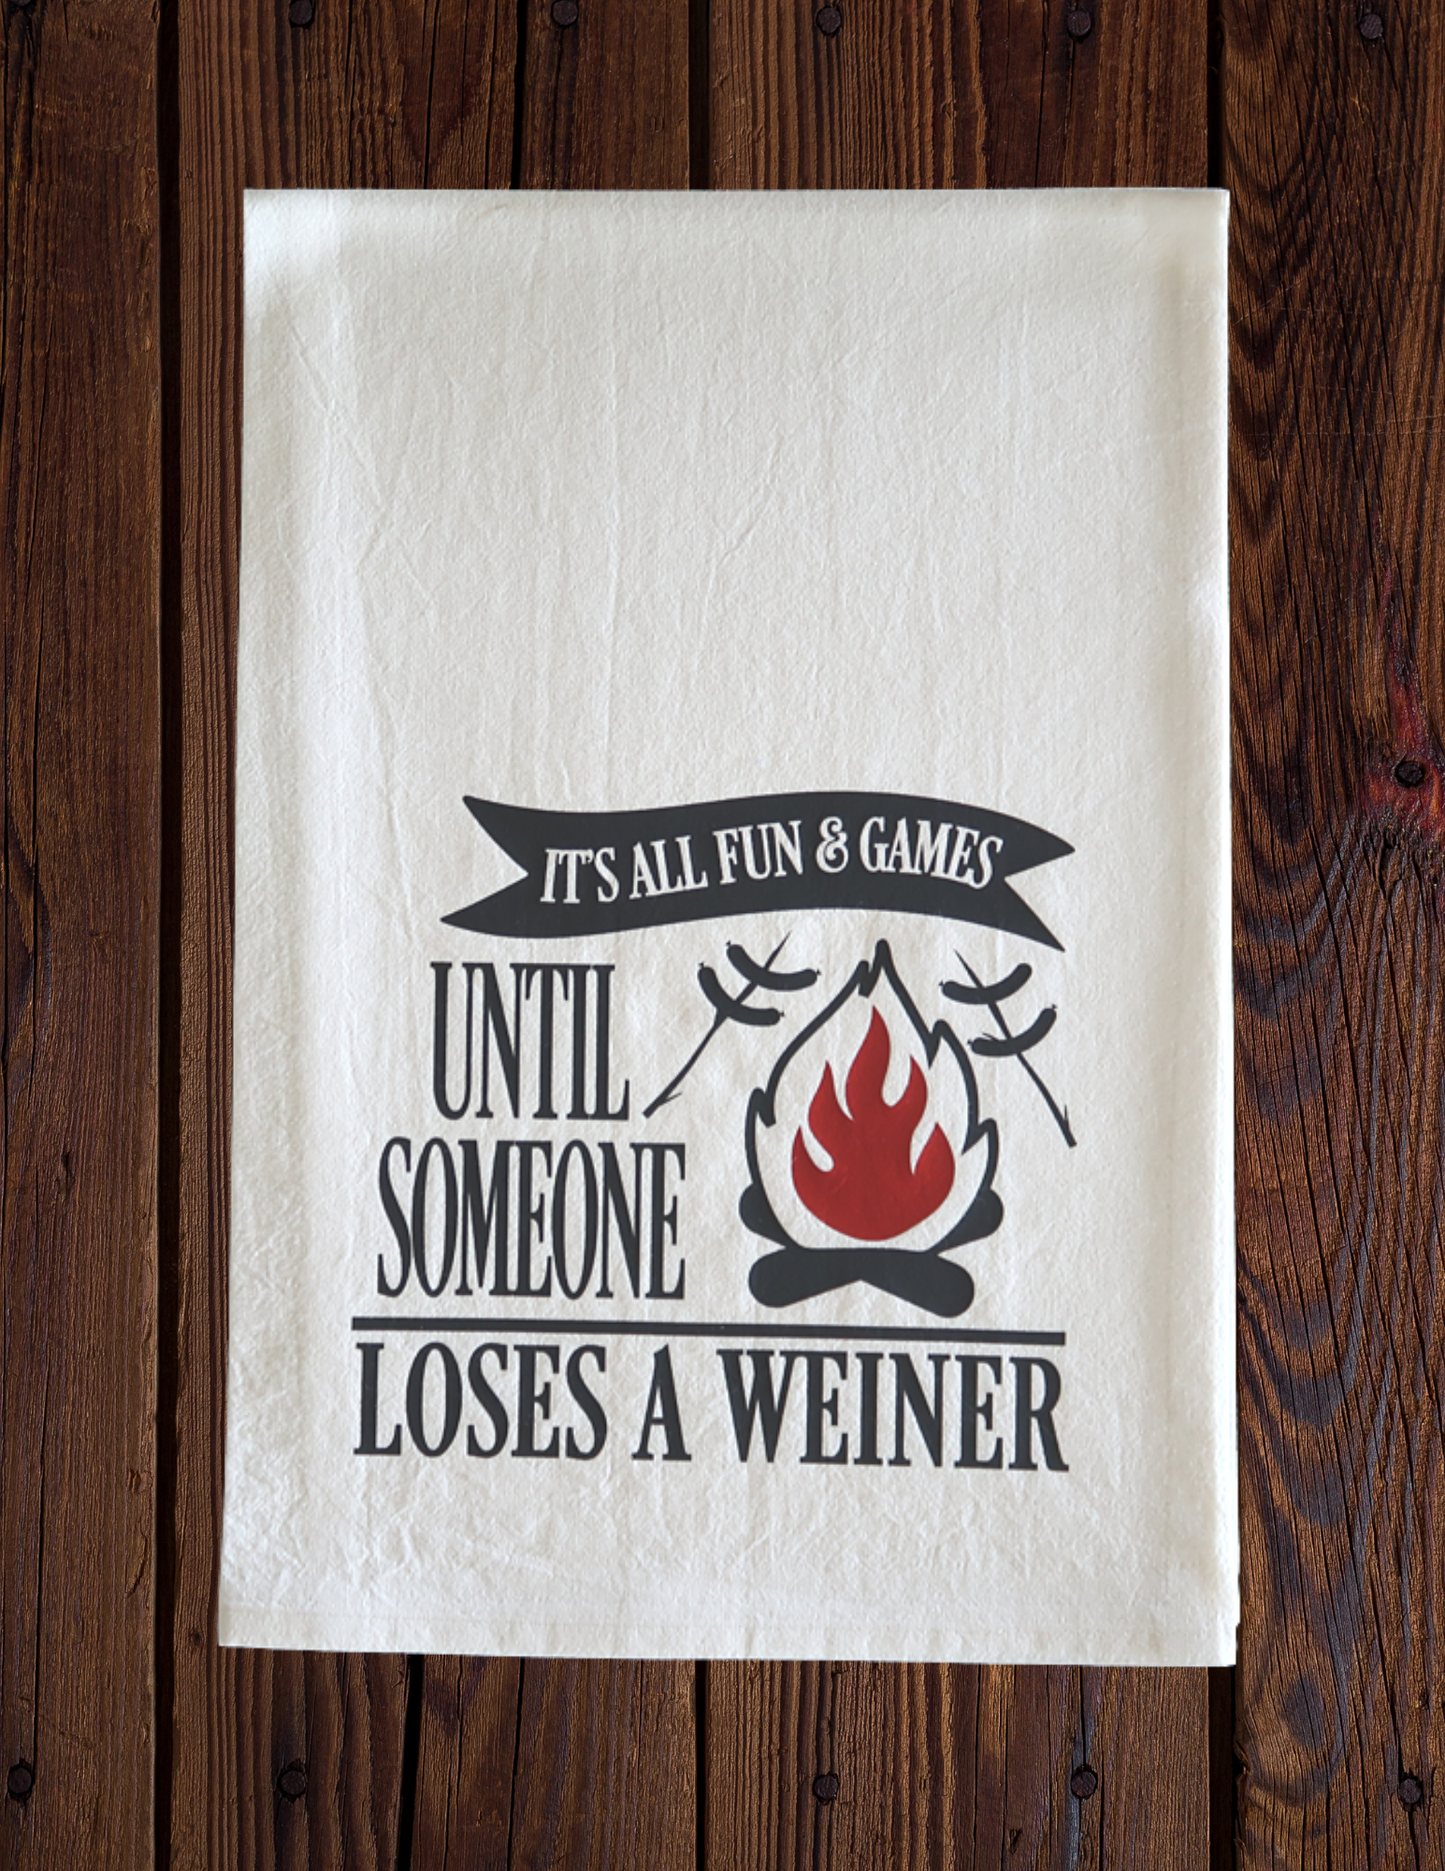 It's All Fun & Games Until Someone Loses a Weiner - Tea Towel